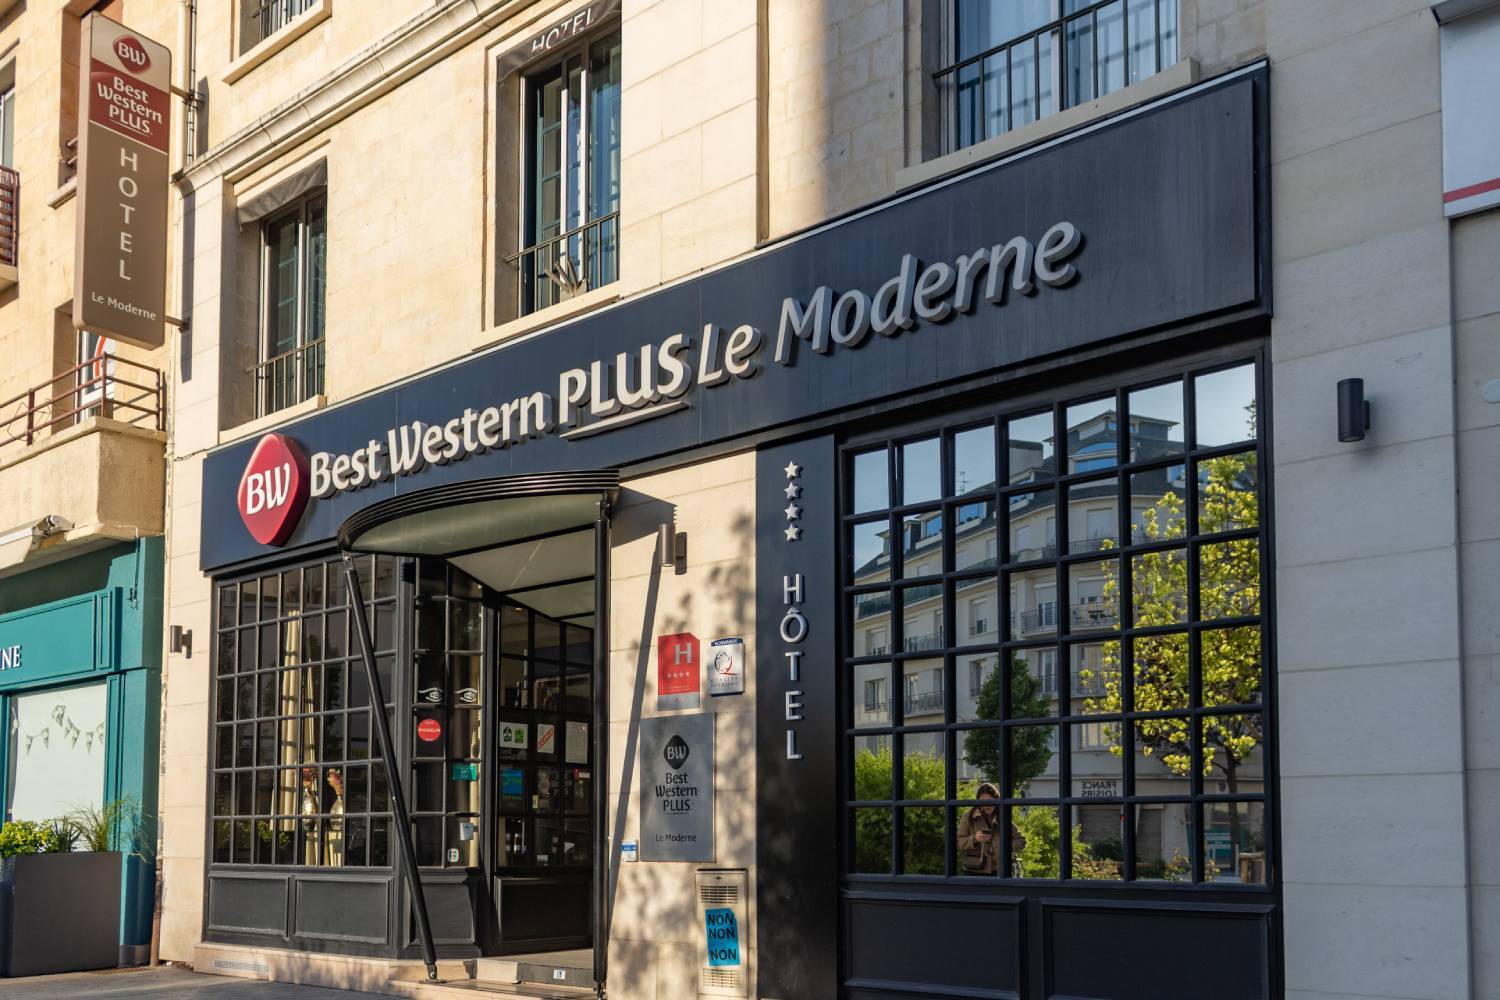 Group accommodation in Normandy | Best Western Plus Le Moderne, hotel in the centre of Caen 